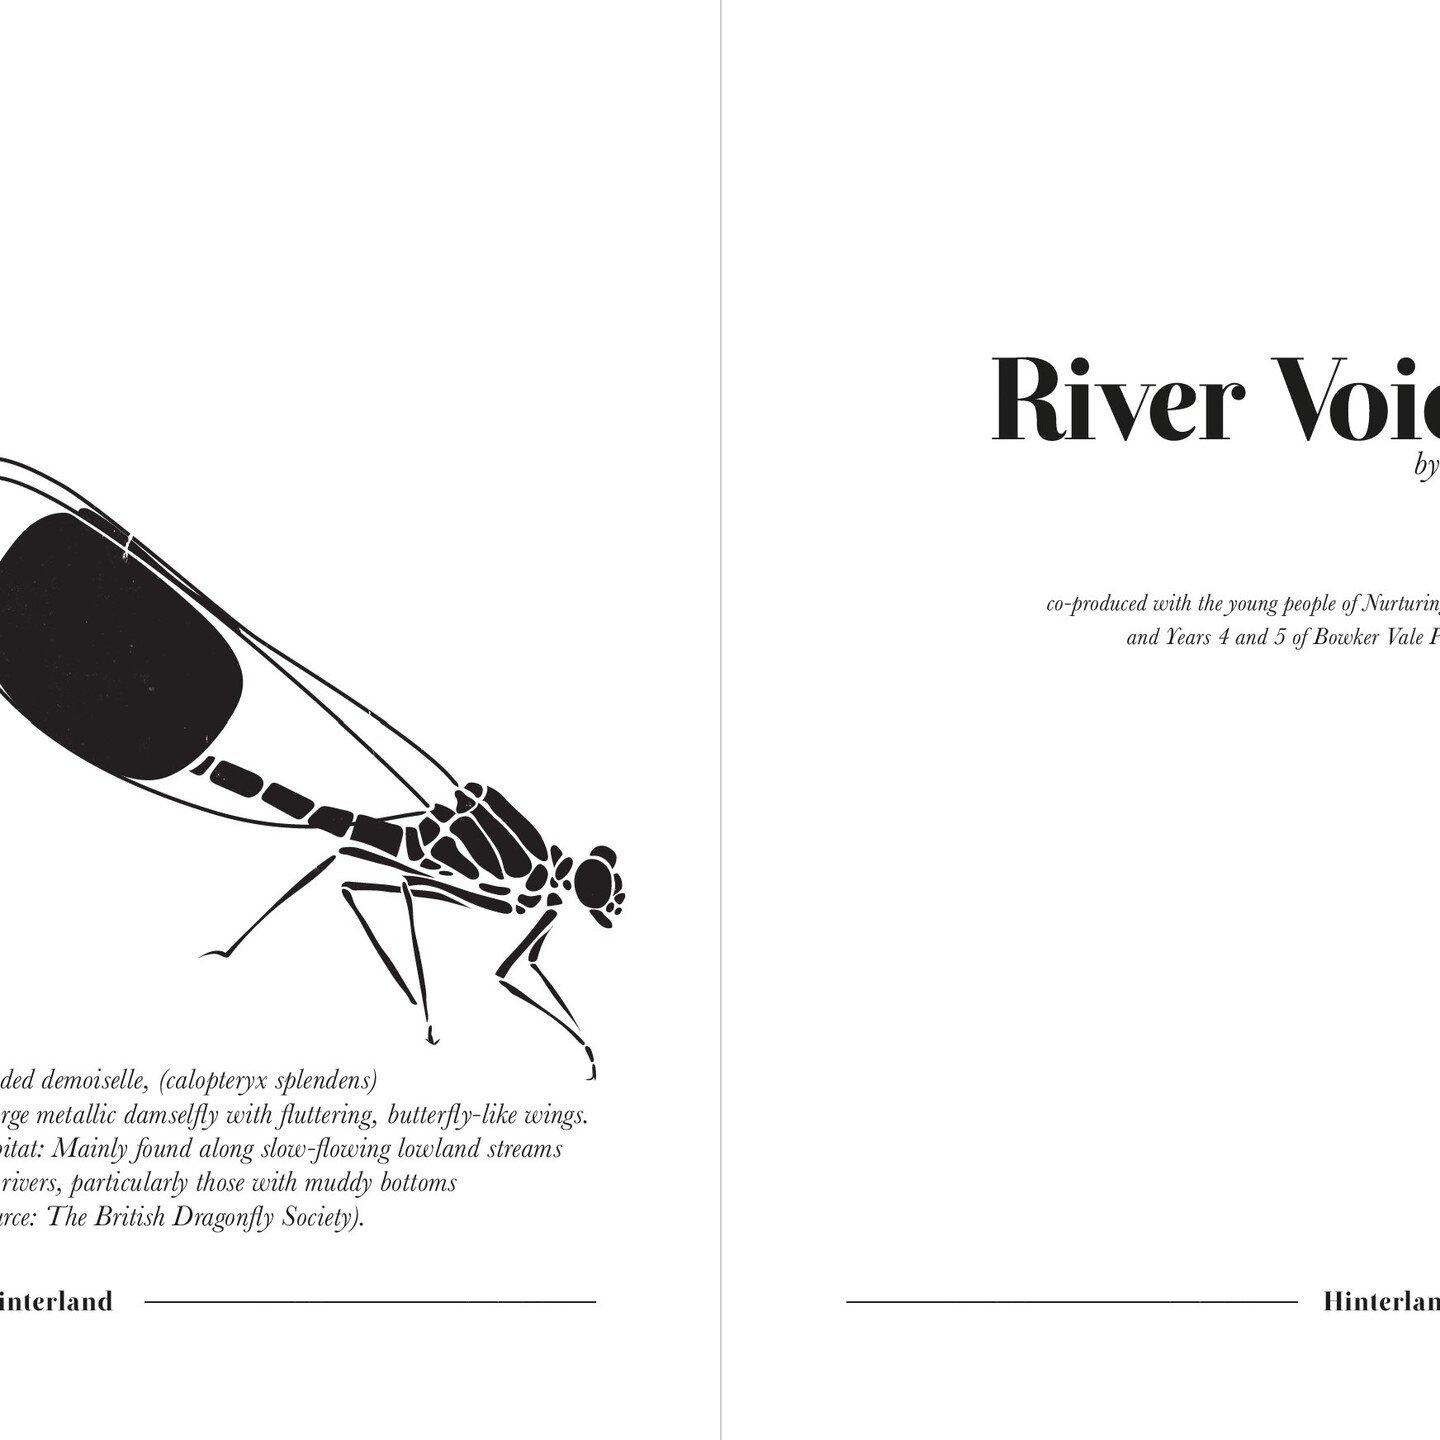 One of the fantastic pieces of climate writing in our latest issue is 'River Voices' by Joe Shute in collaboration with Bowker Vale Primary School and Nurturing Foundations. Joe told us &quot;It's about working with communities to rediscover 'lost' u